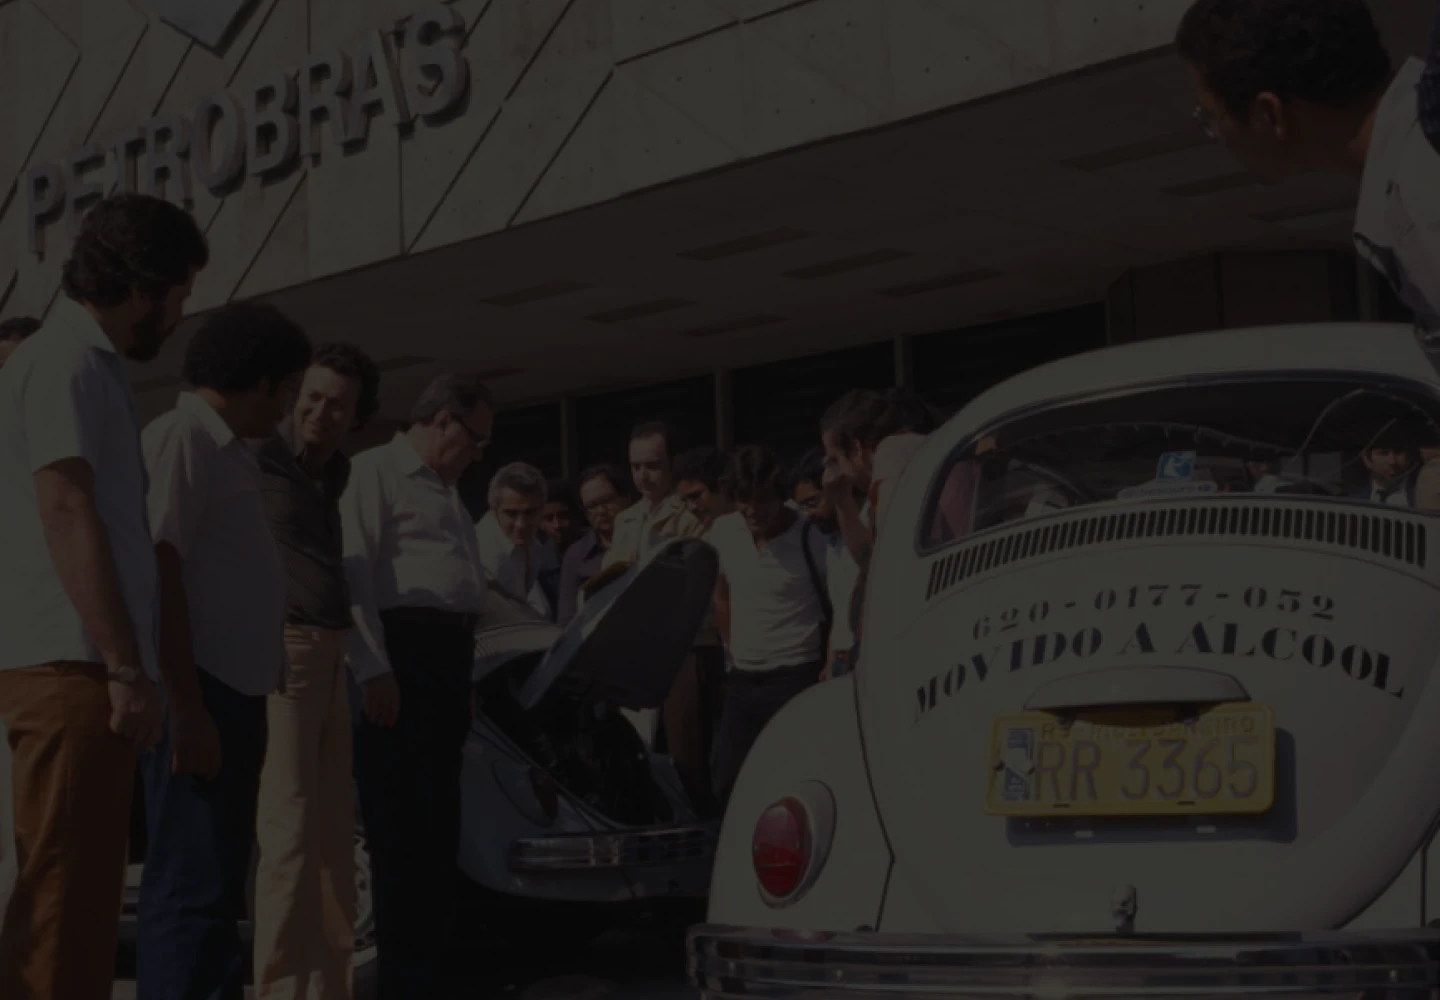 Old photo of people watching two VW Beetles in front of Petrobras’ headquarters. In one of them, it is written “Powered by ethanol”.